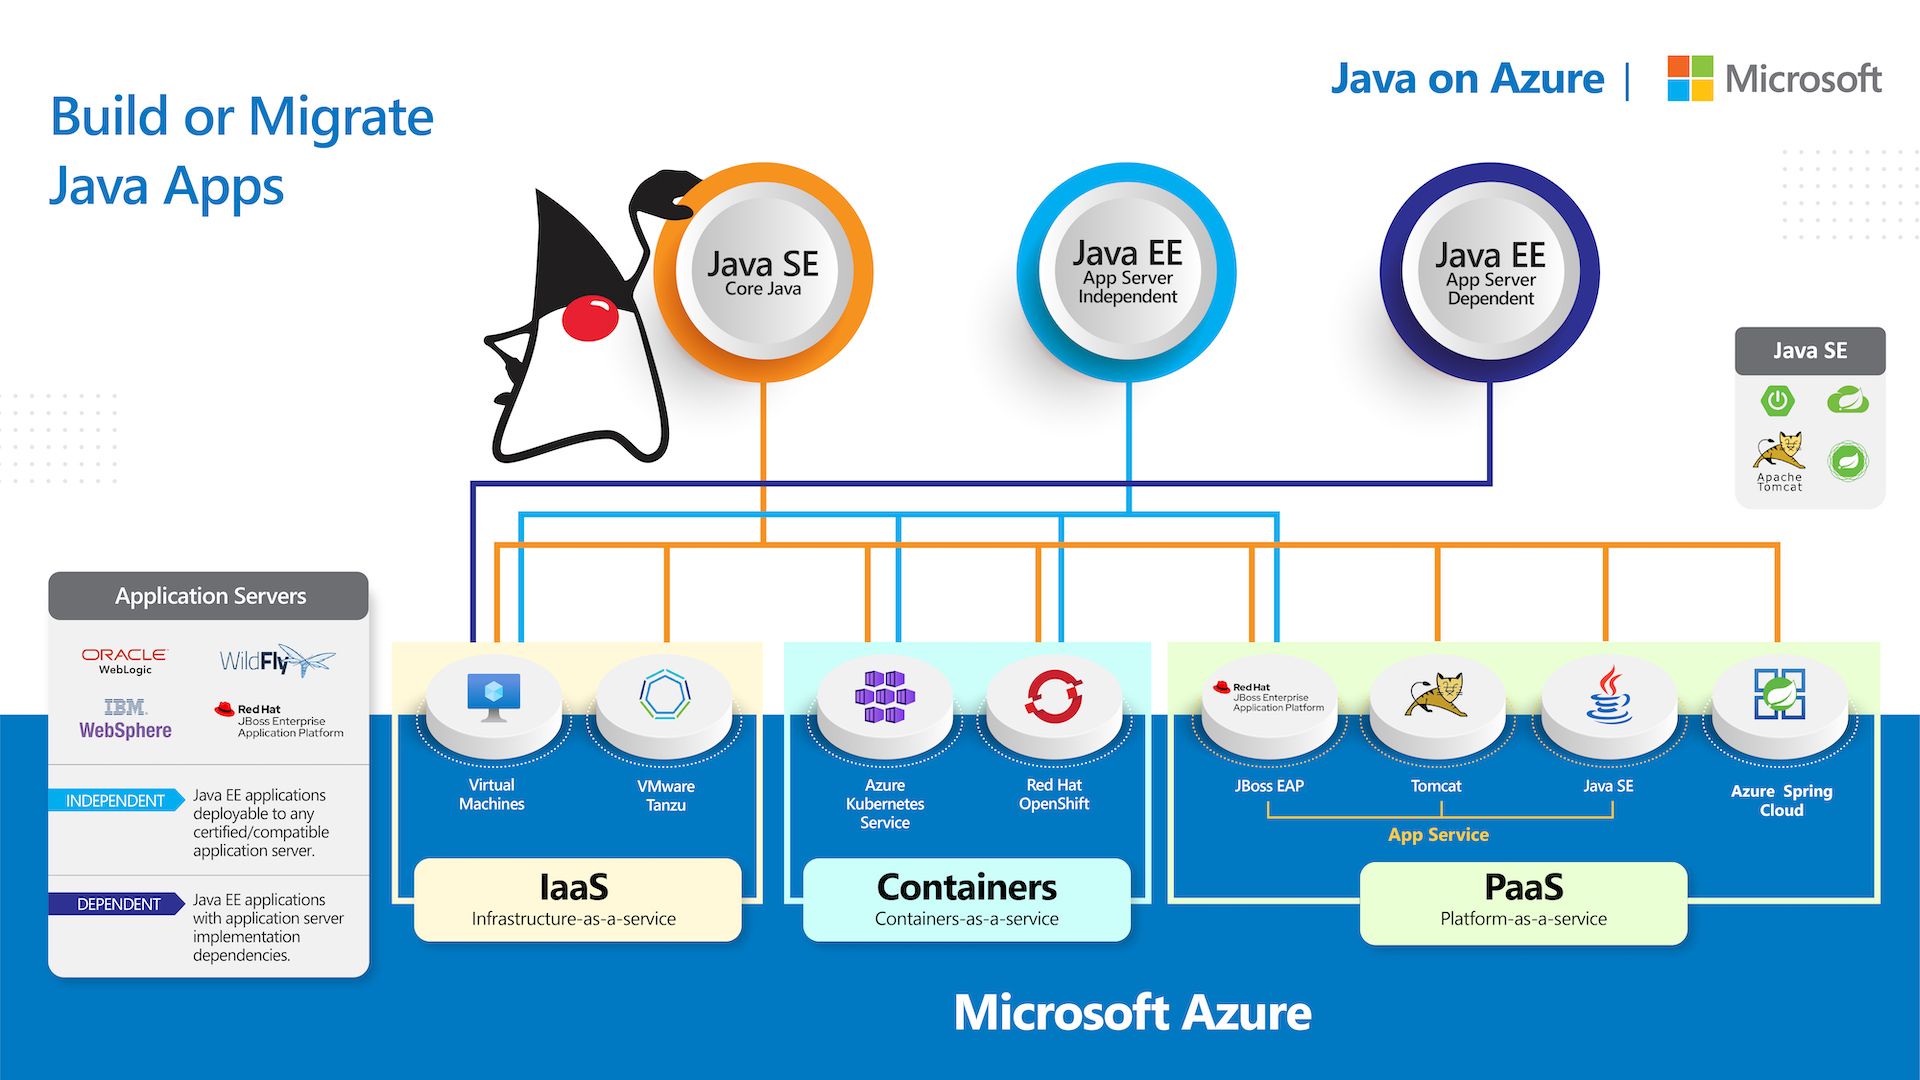 Supercharge your Java Apps on Azure